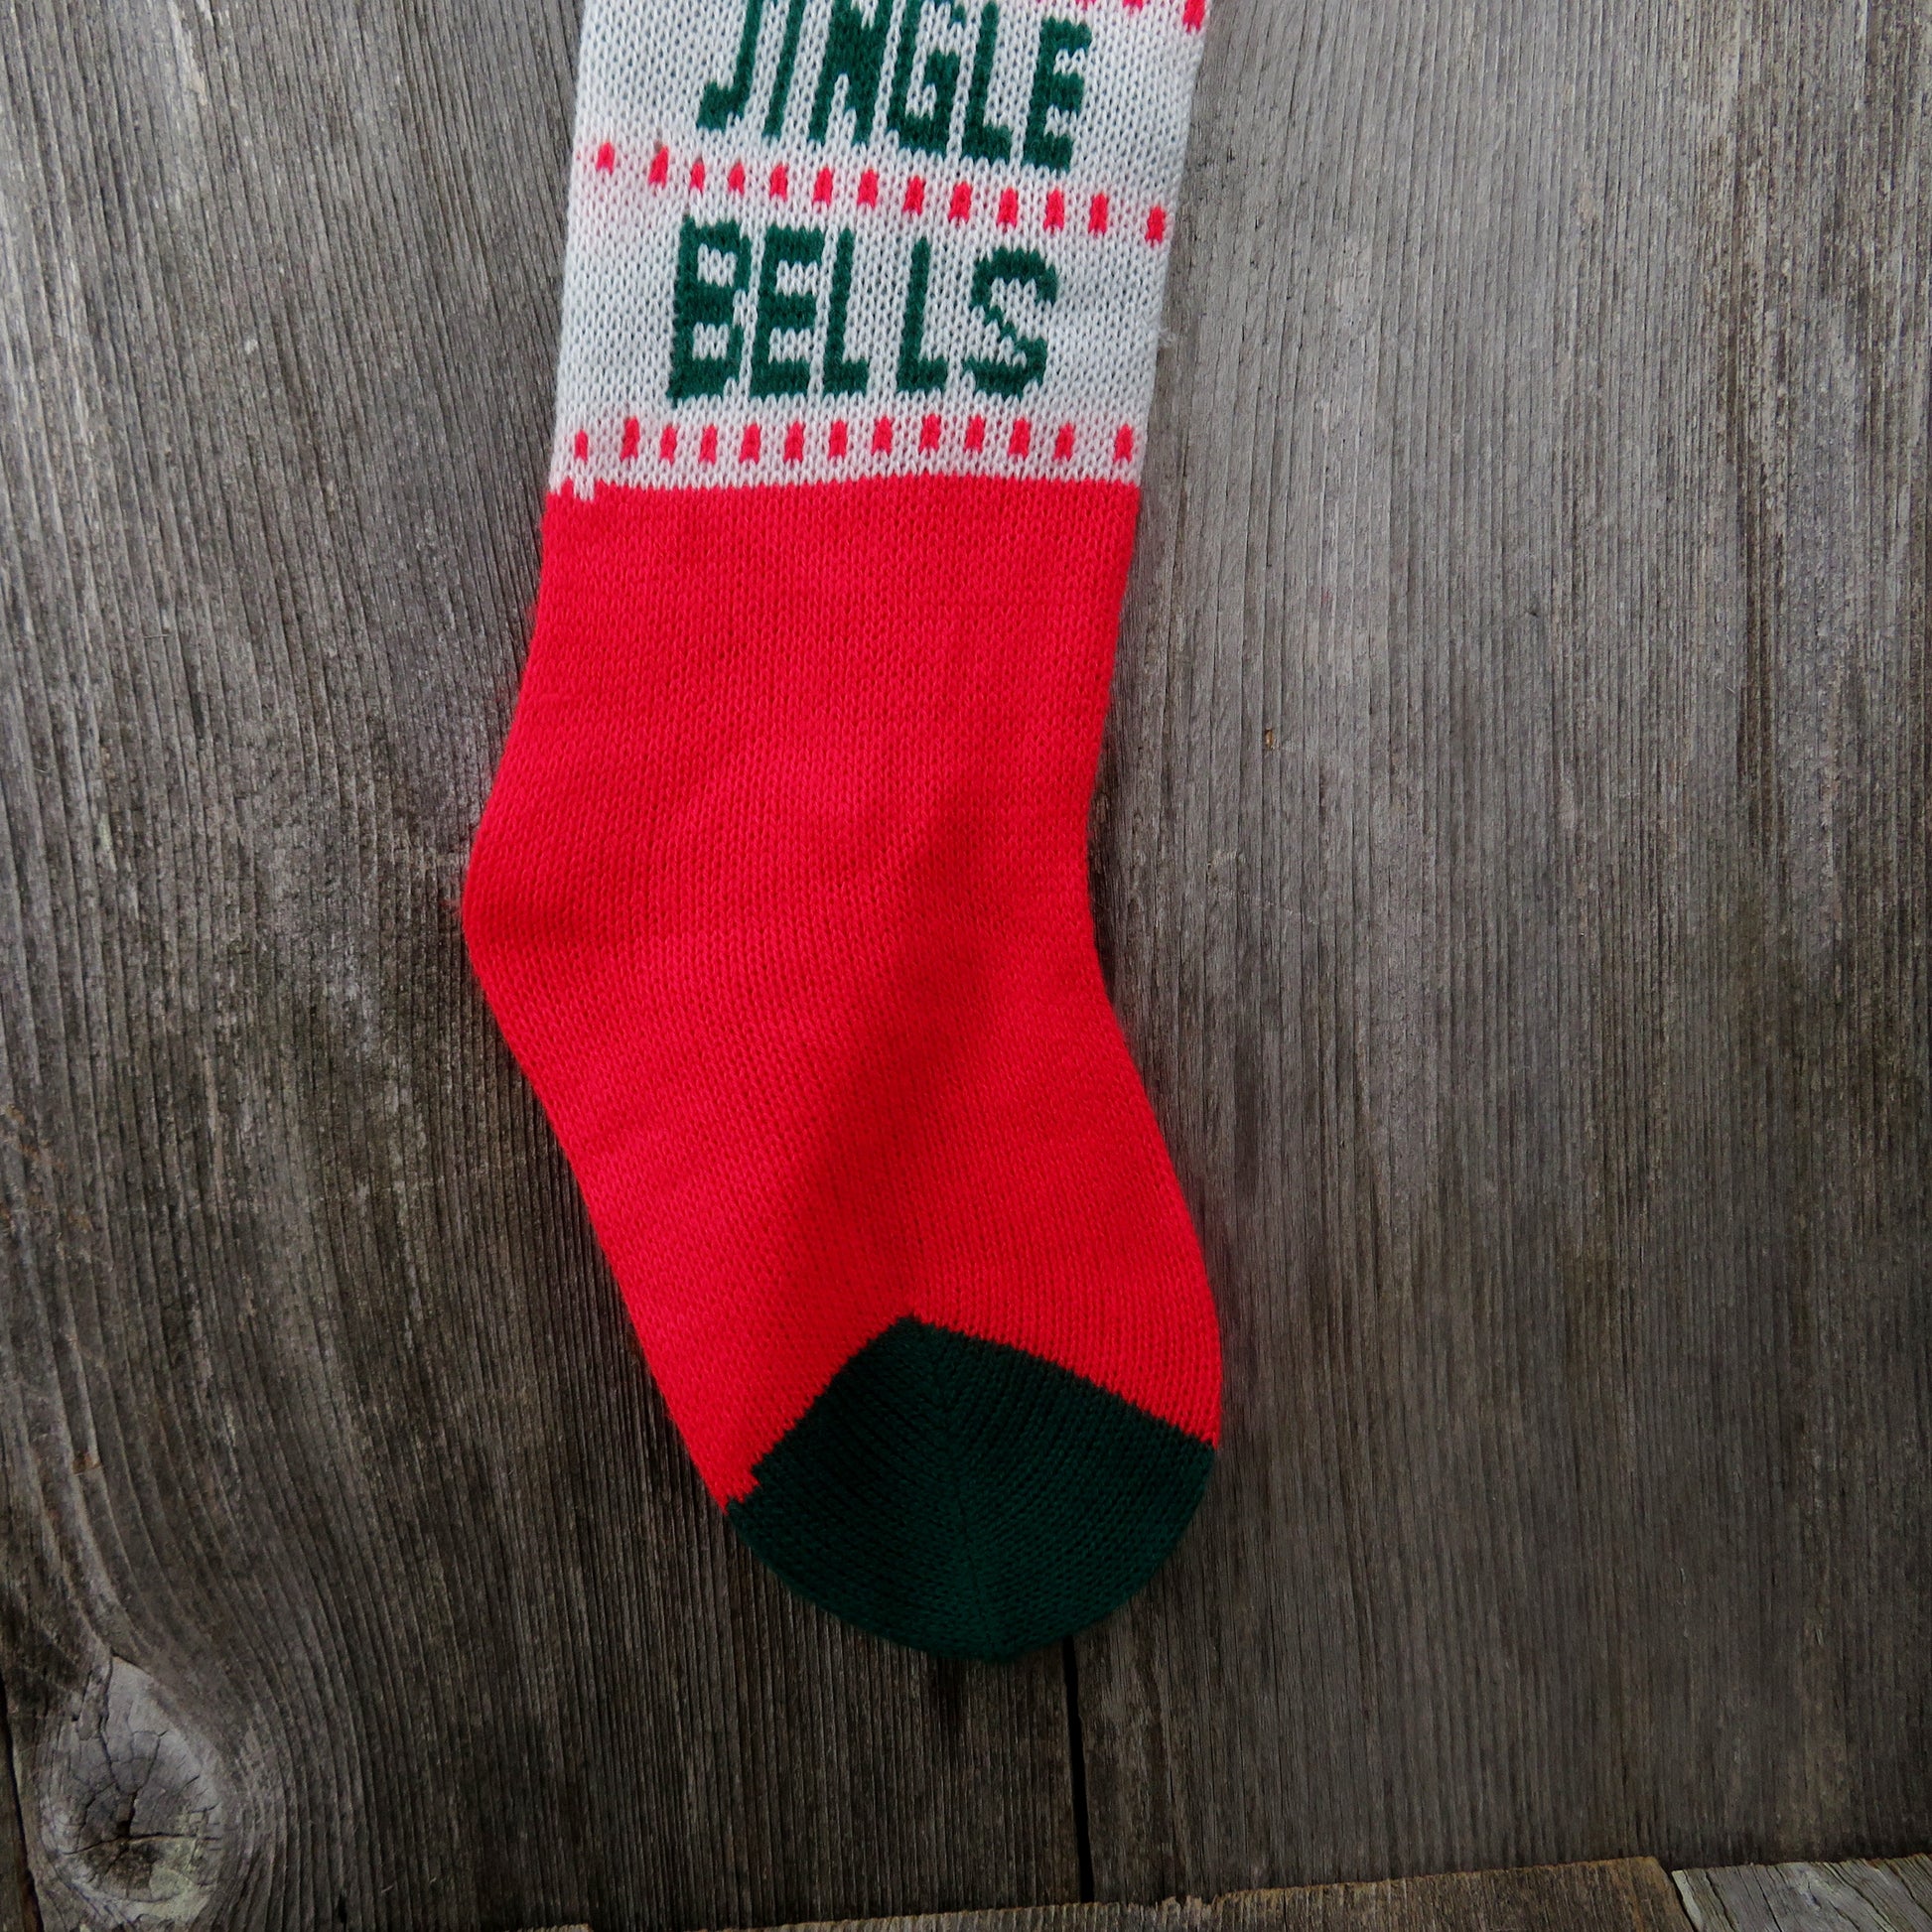 Christmas Stocking Knitted Knit Jingle Bells Music Notes Red Green Vtg 1980s s10 - At Grandma's Table